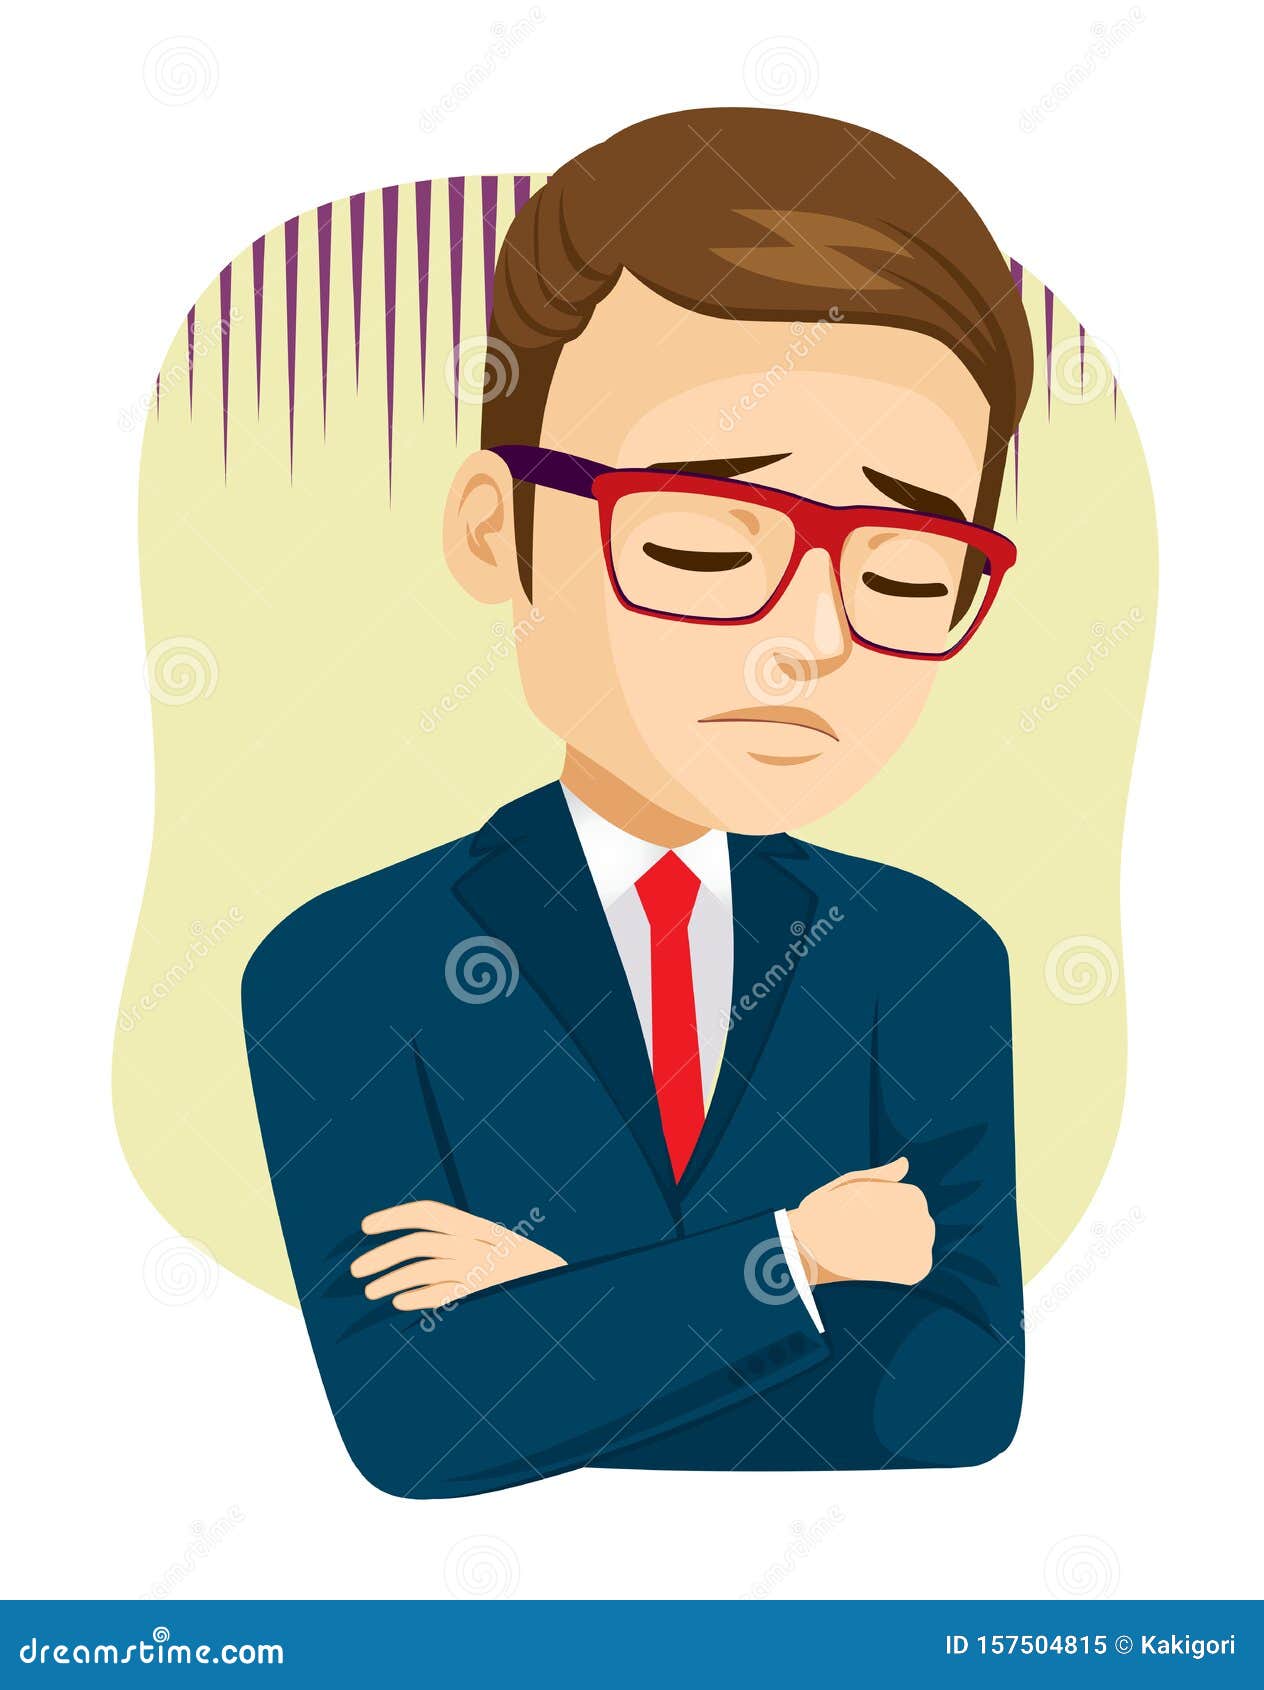 Worried Businessman Crossed Arms Stock Vector - Illustration of emotion ...